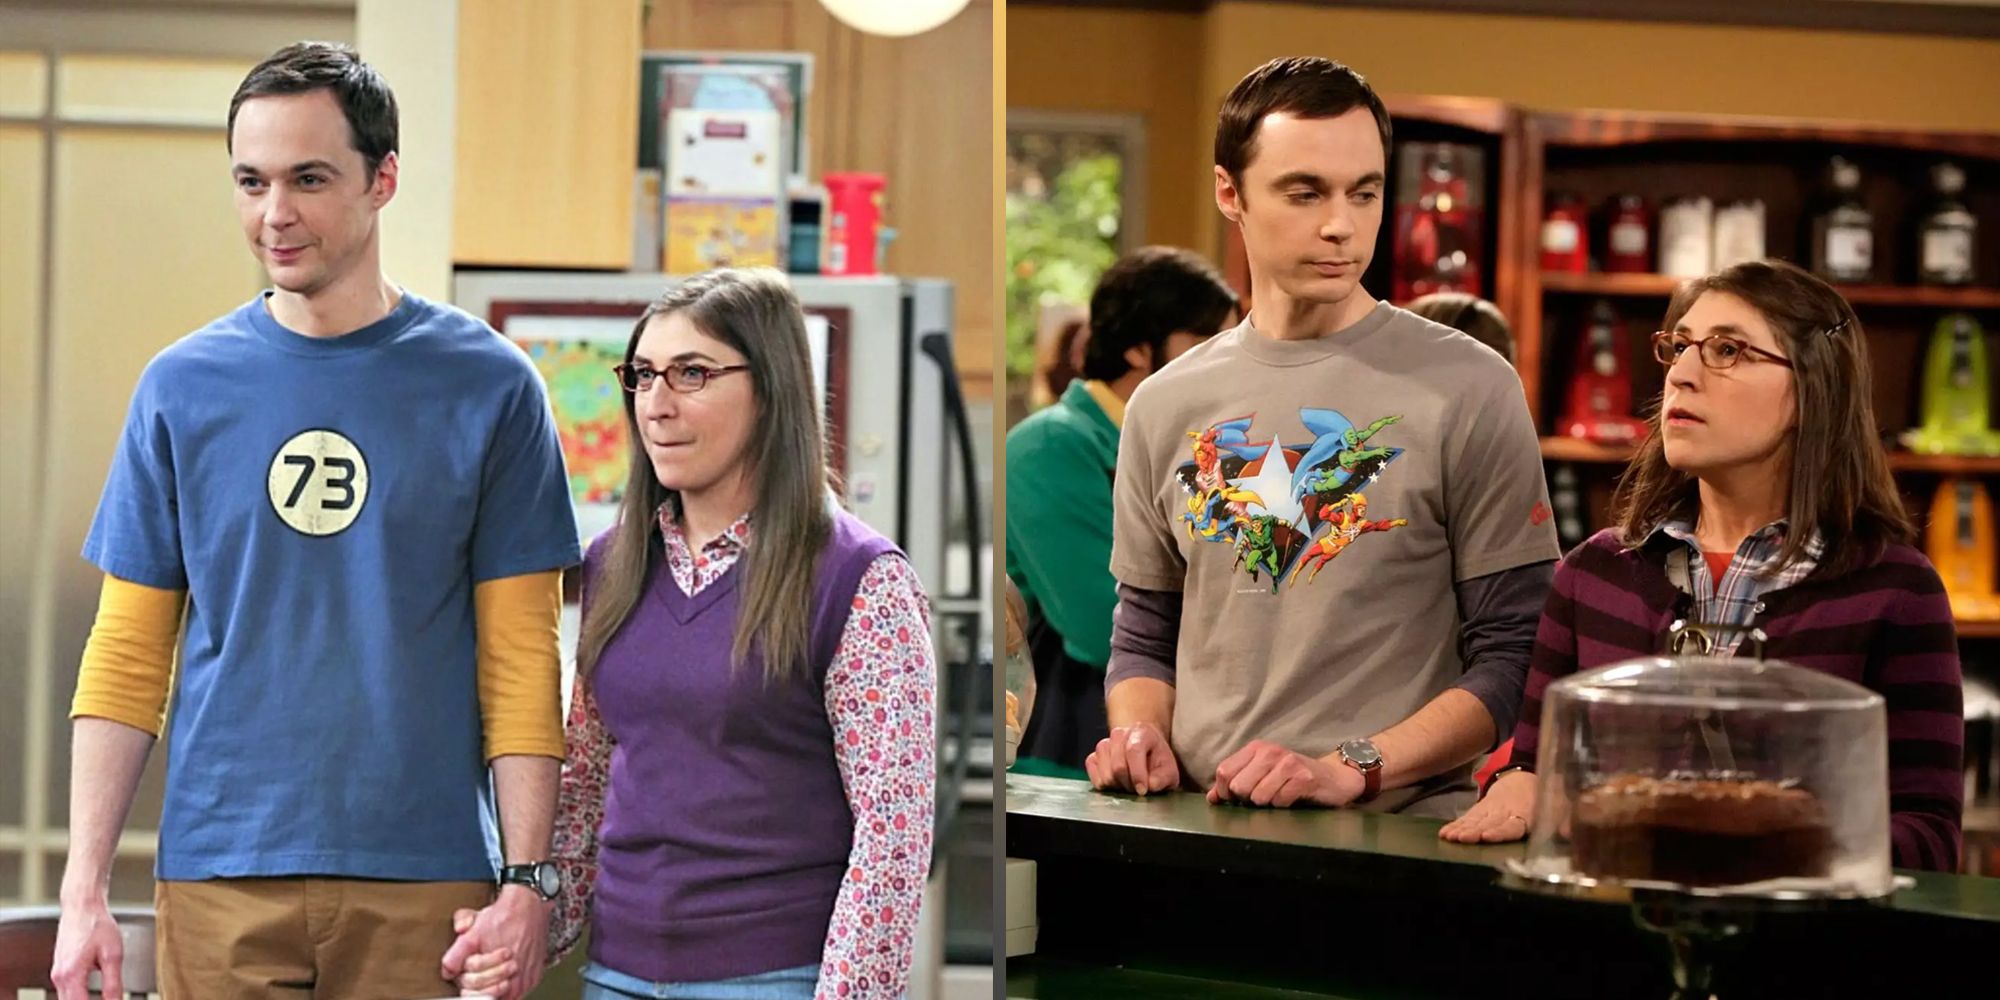 Sheldon and Amy holding hands and in the cafe.